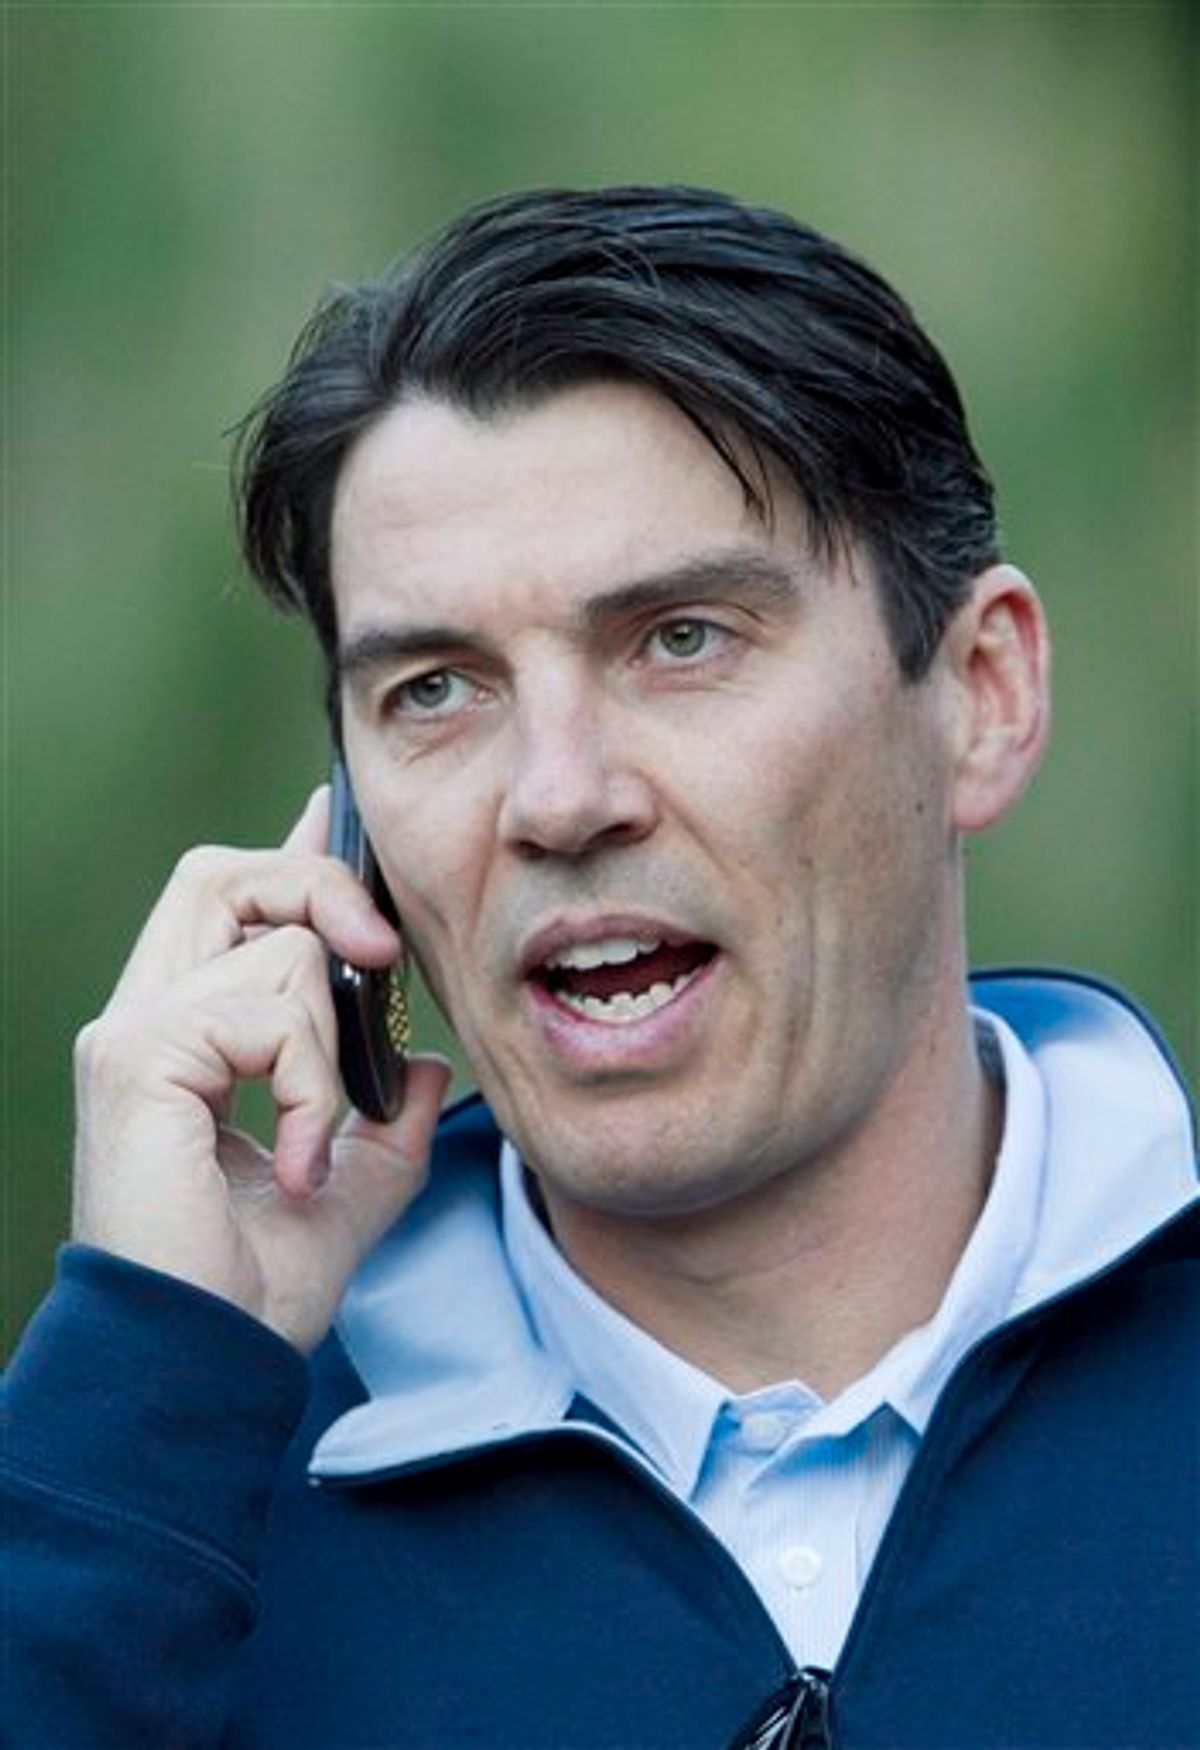 FILE - In this July 8, 2010 file photo, AOL Chairman and CEO Tim Armstrong talks on the phone as he walks to a morning session at the annual Allen & Co. media summit in Sun Valley, Idaho. Online company AOL Inc. is buying online news hub Huffington Post Monday, Feb. 7, 2011, in a $315 million deal that represents a bold bet on the future of online news.(AP Photo/Nati Harnik)    (AP)